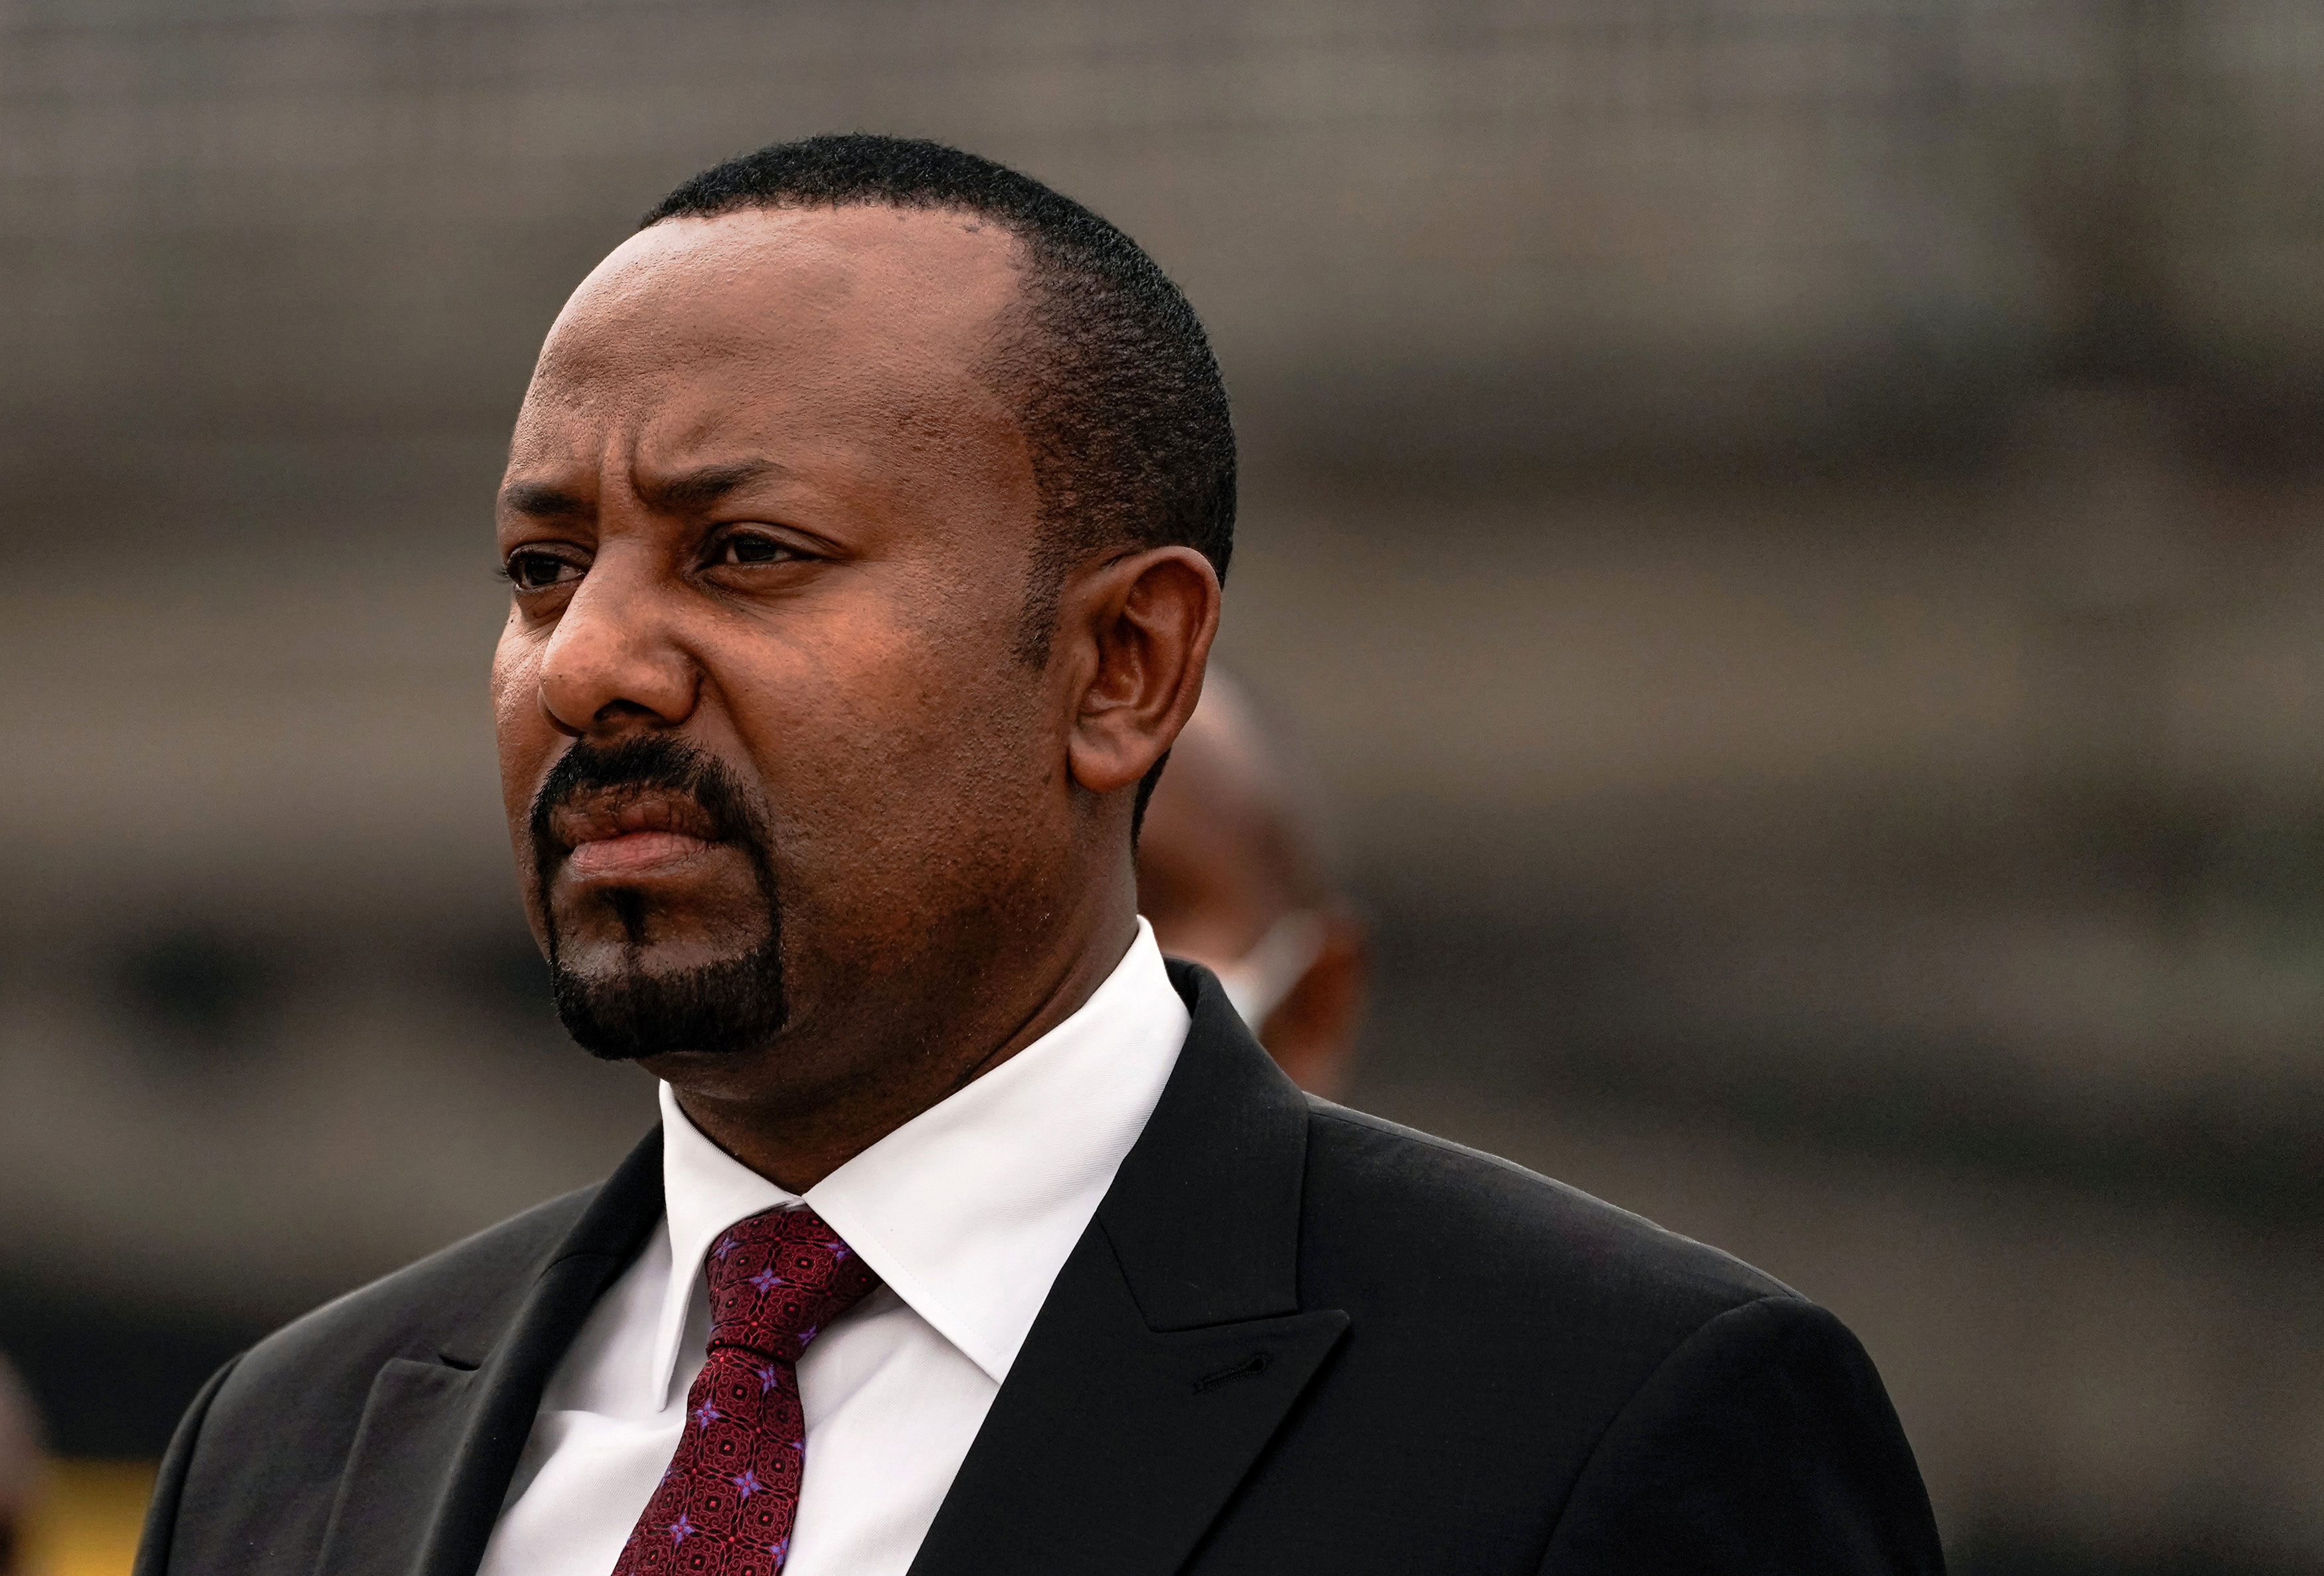 Ethiopian Prime Minister Abiy Ahmed attends an event in Addis Ababa, Ethiopia, on June 13.